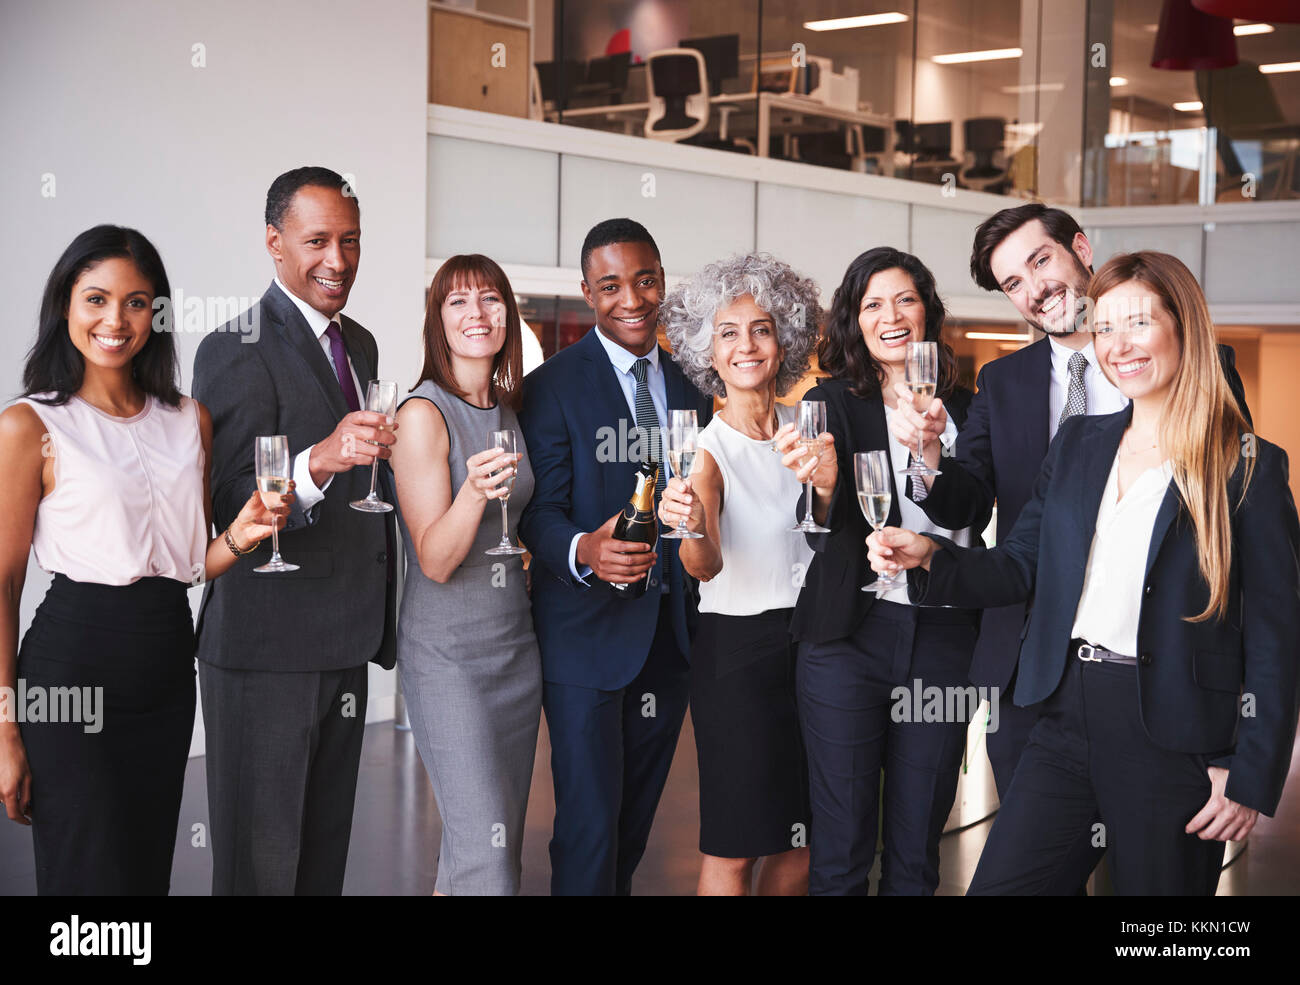 Business people celebrating in the office Stock Photo